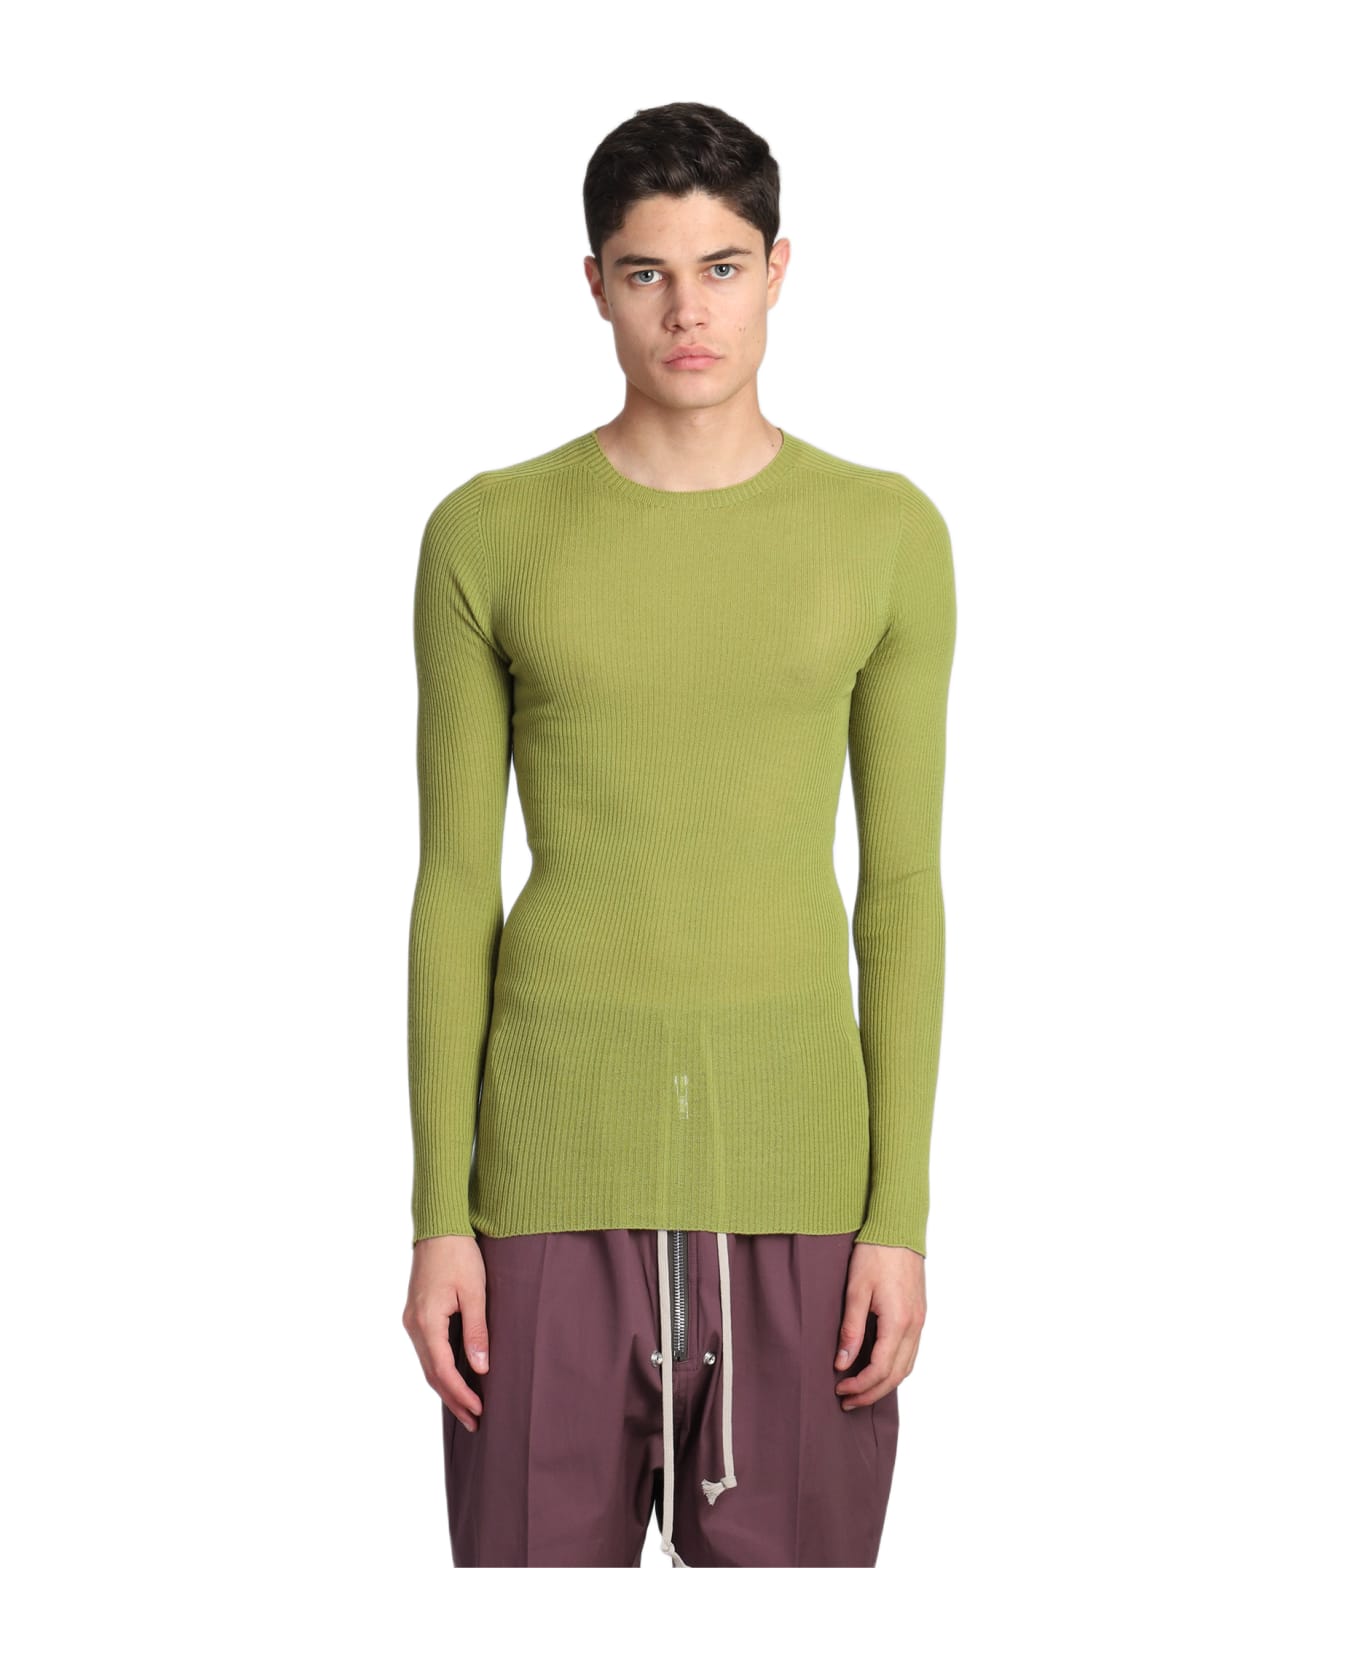 Rick Owens Ribbed Round Knitwear In Green Wool - green ニットウェア